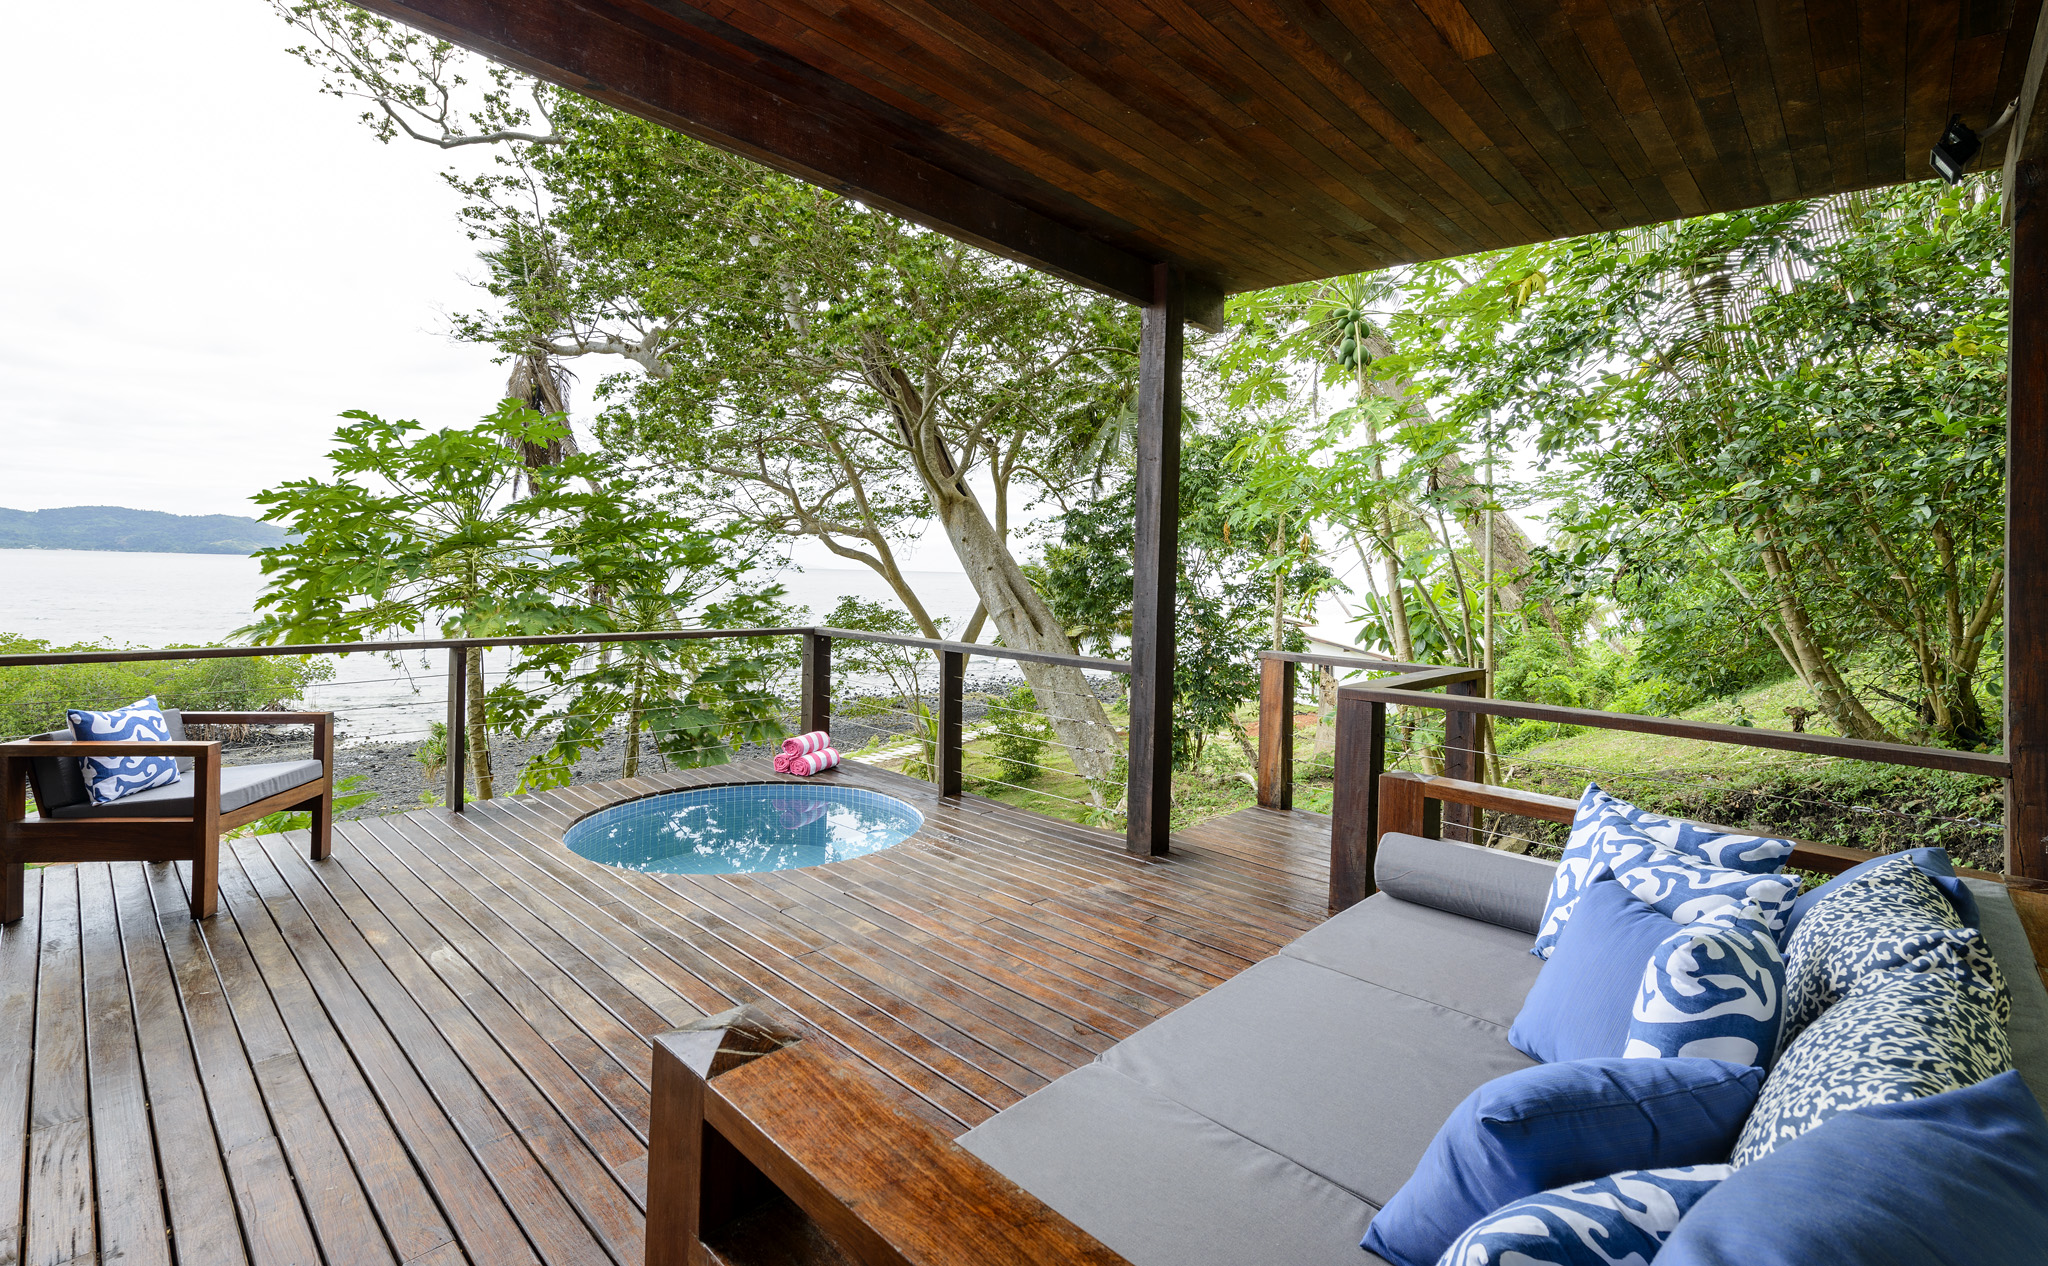 Oceanfront Villa - Outdoor Deck with ocean views and oversized daybed, The Remote Resort Fiji Islands